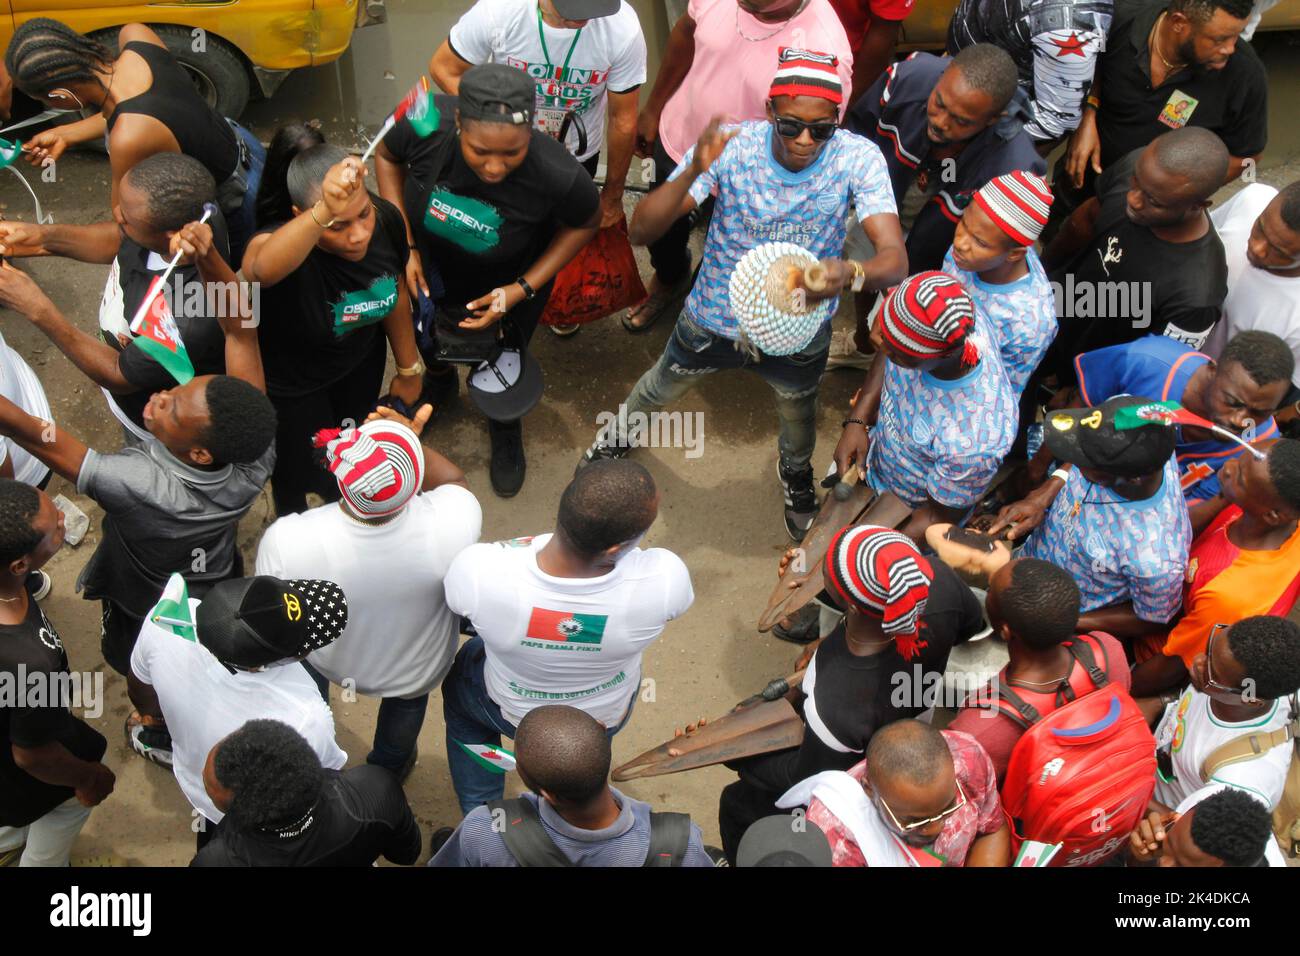 Lagos, Nigeria 1st October, 2022 Supporters (aka Obedient) of Peter Obi, Presidential candidate of Labour Party for the 2023 Presidential Election hold a rally in Ikeja, Lagos, Nigeria, on Saturday, October 1, 2022. Photo by Adekunle Ajayi Credit: Adekunle Ajayi/Alamy Live News Stock Photo